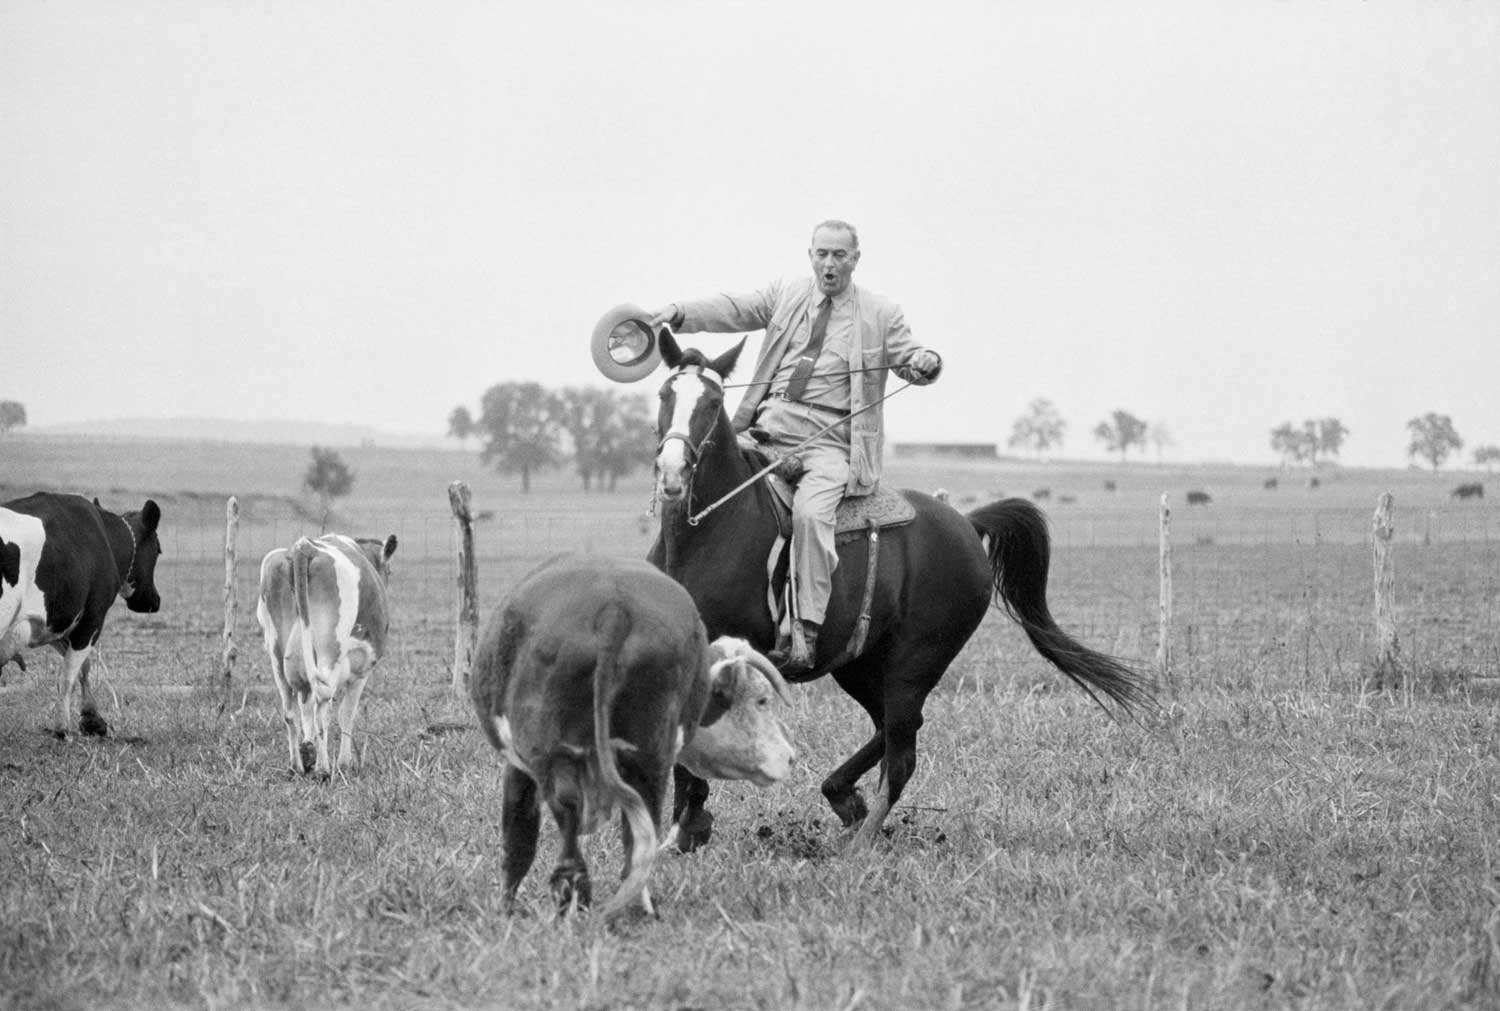 Johnson preferred his 2,700 acre Texas Hill country ranch to posh resorts, and he hosted guests there year-round. He owned 400 head of cattle and delighted in playing cowboy for visiting dignitaries. He also took guests for a ride in his tricked out amphibious car, surprising them by turning off road and into a pond.